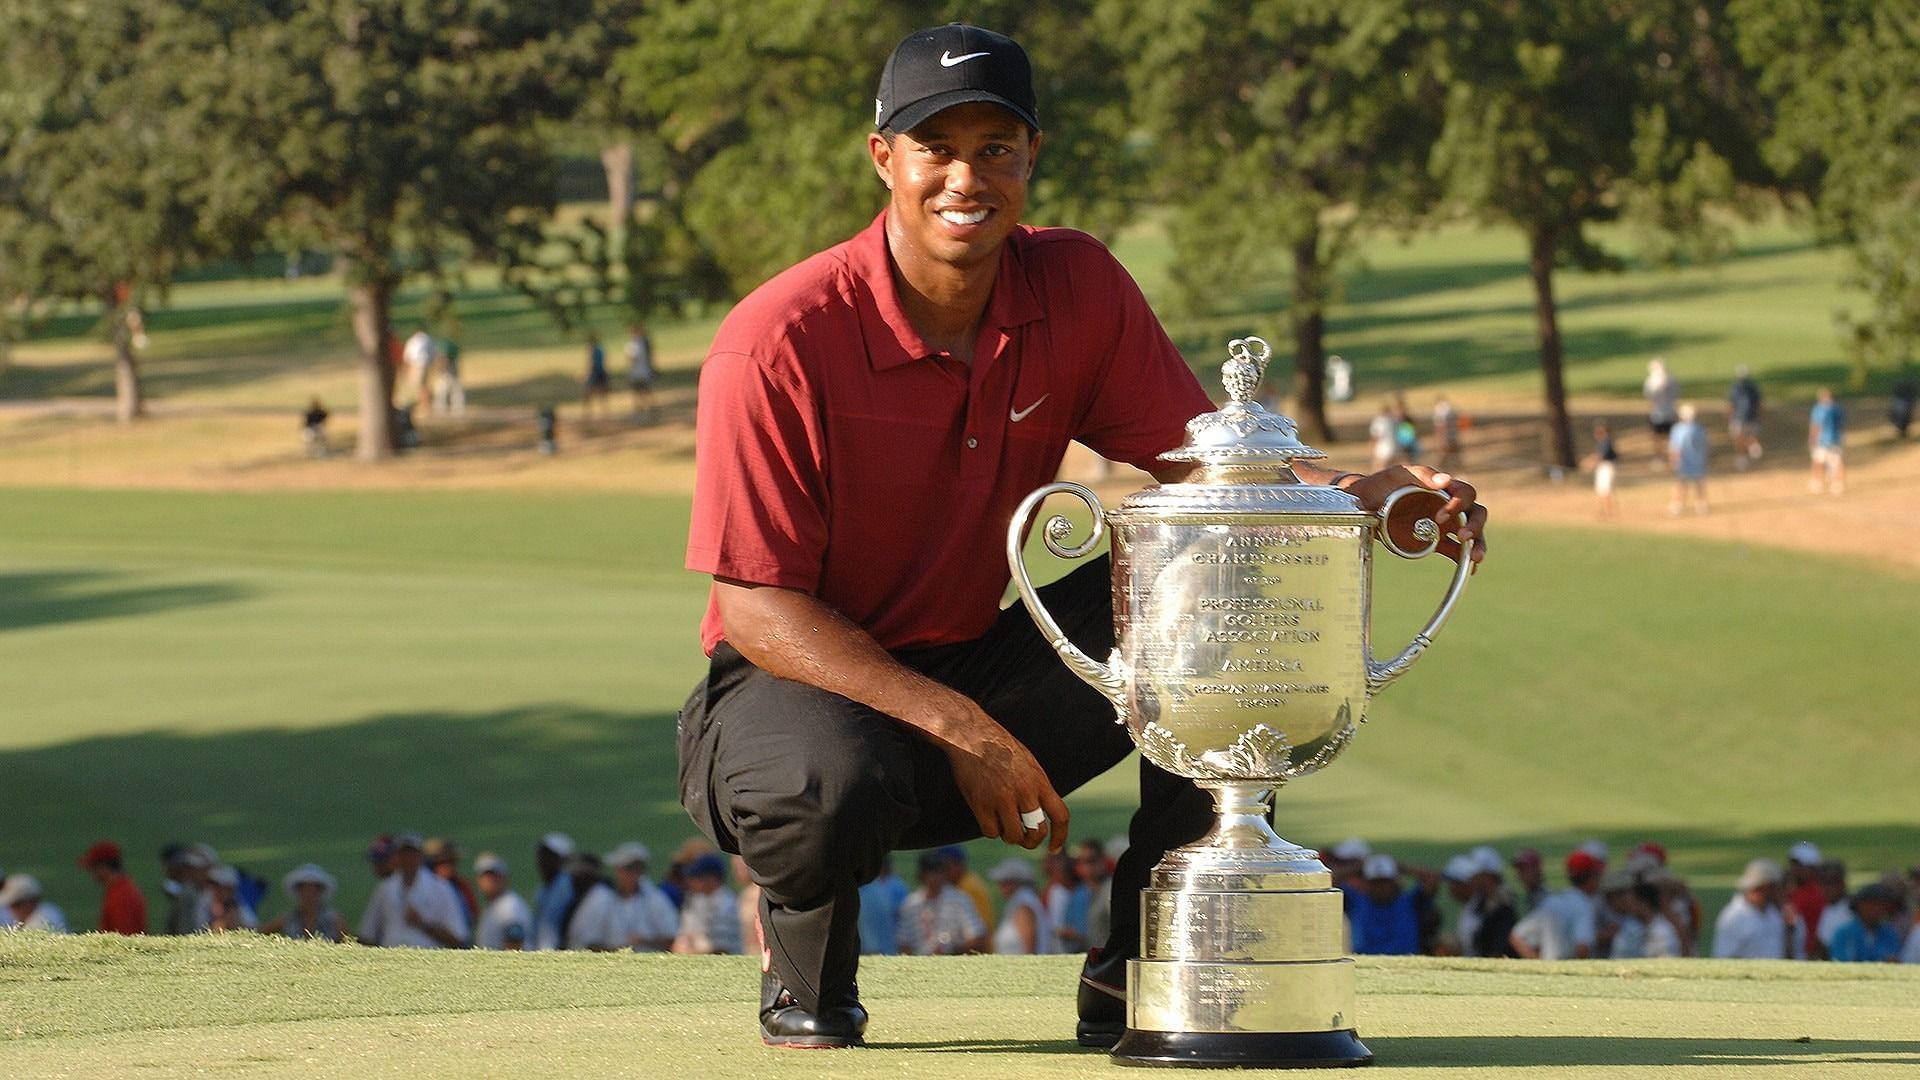 Tiger Woods poses with the Wanamaker trophy after winning the 2007 PGA Championship